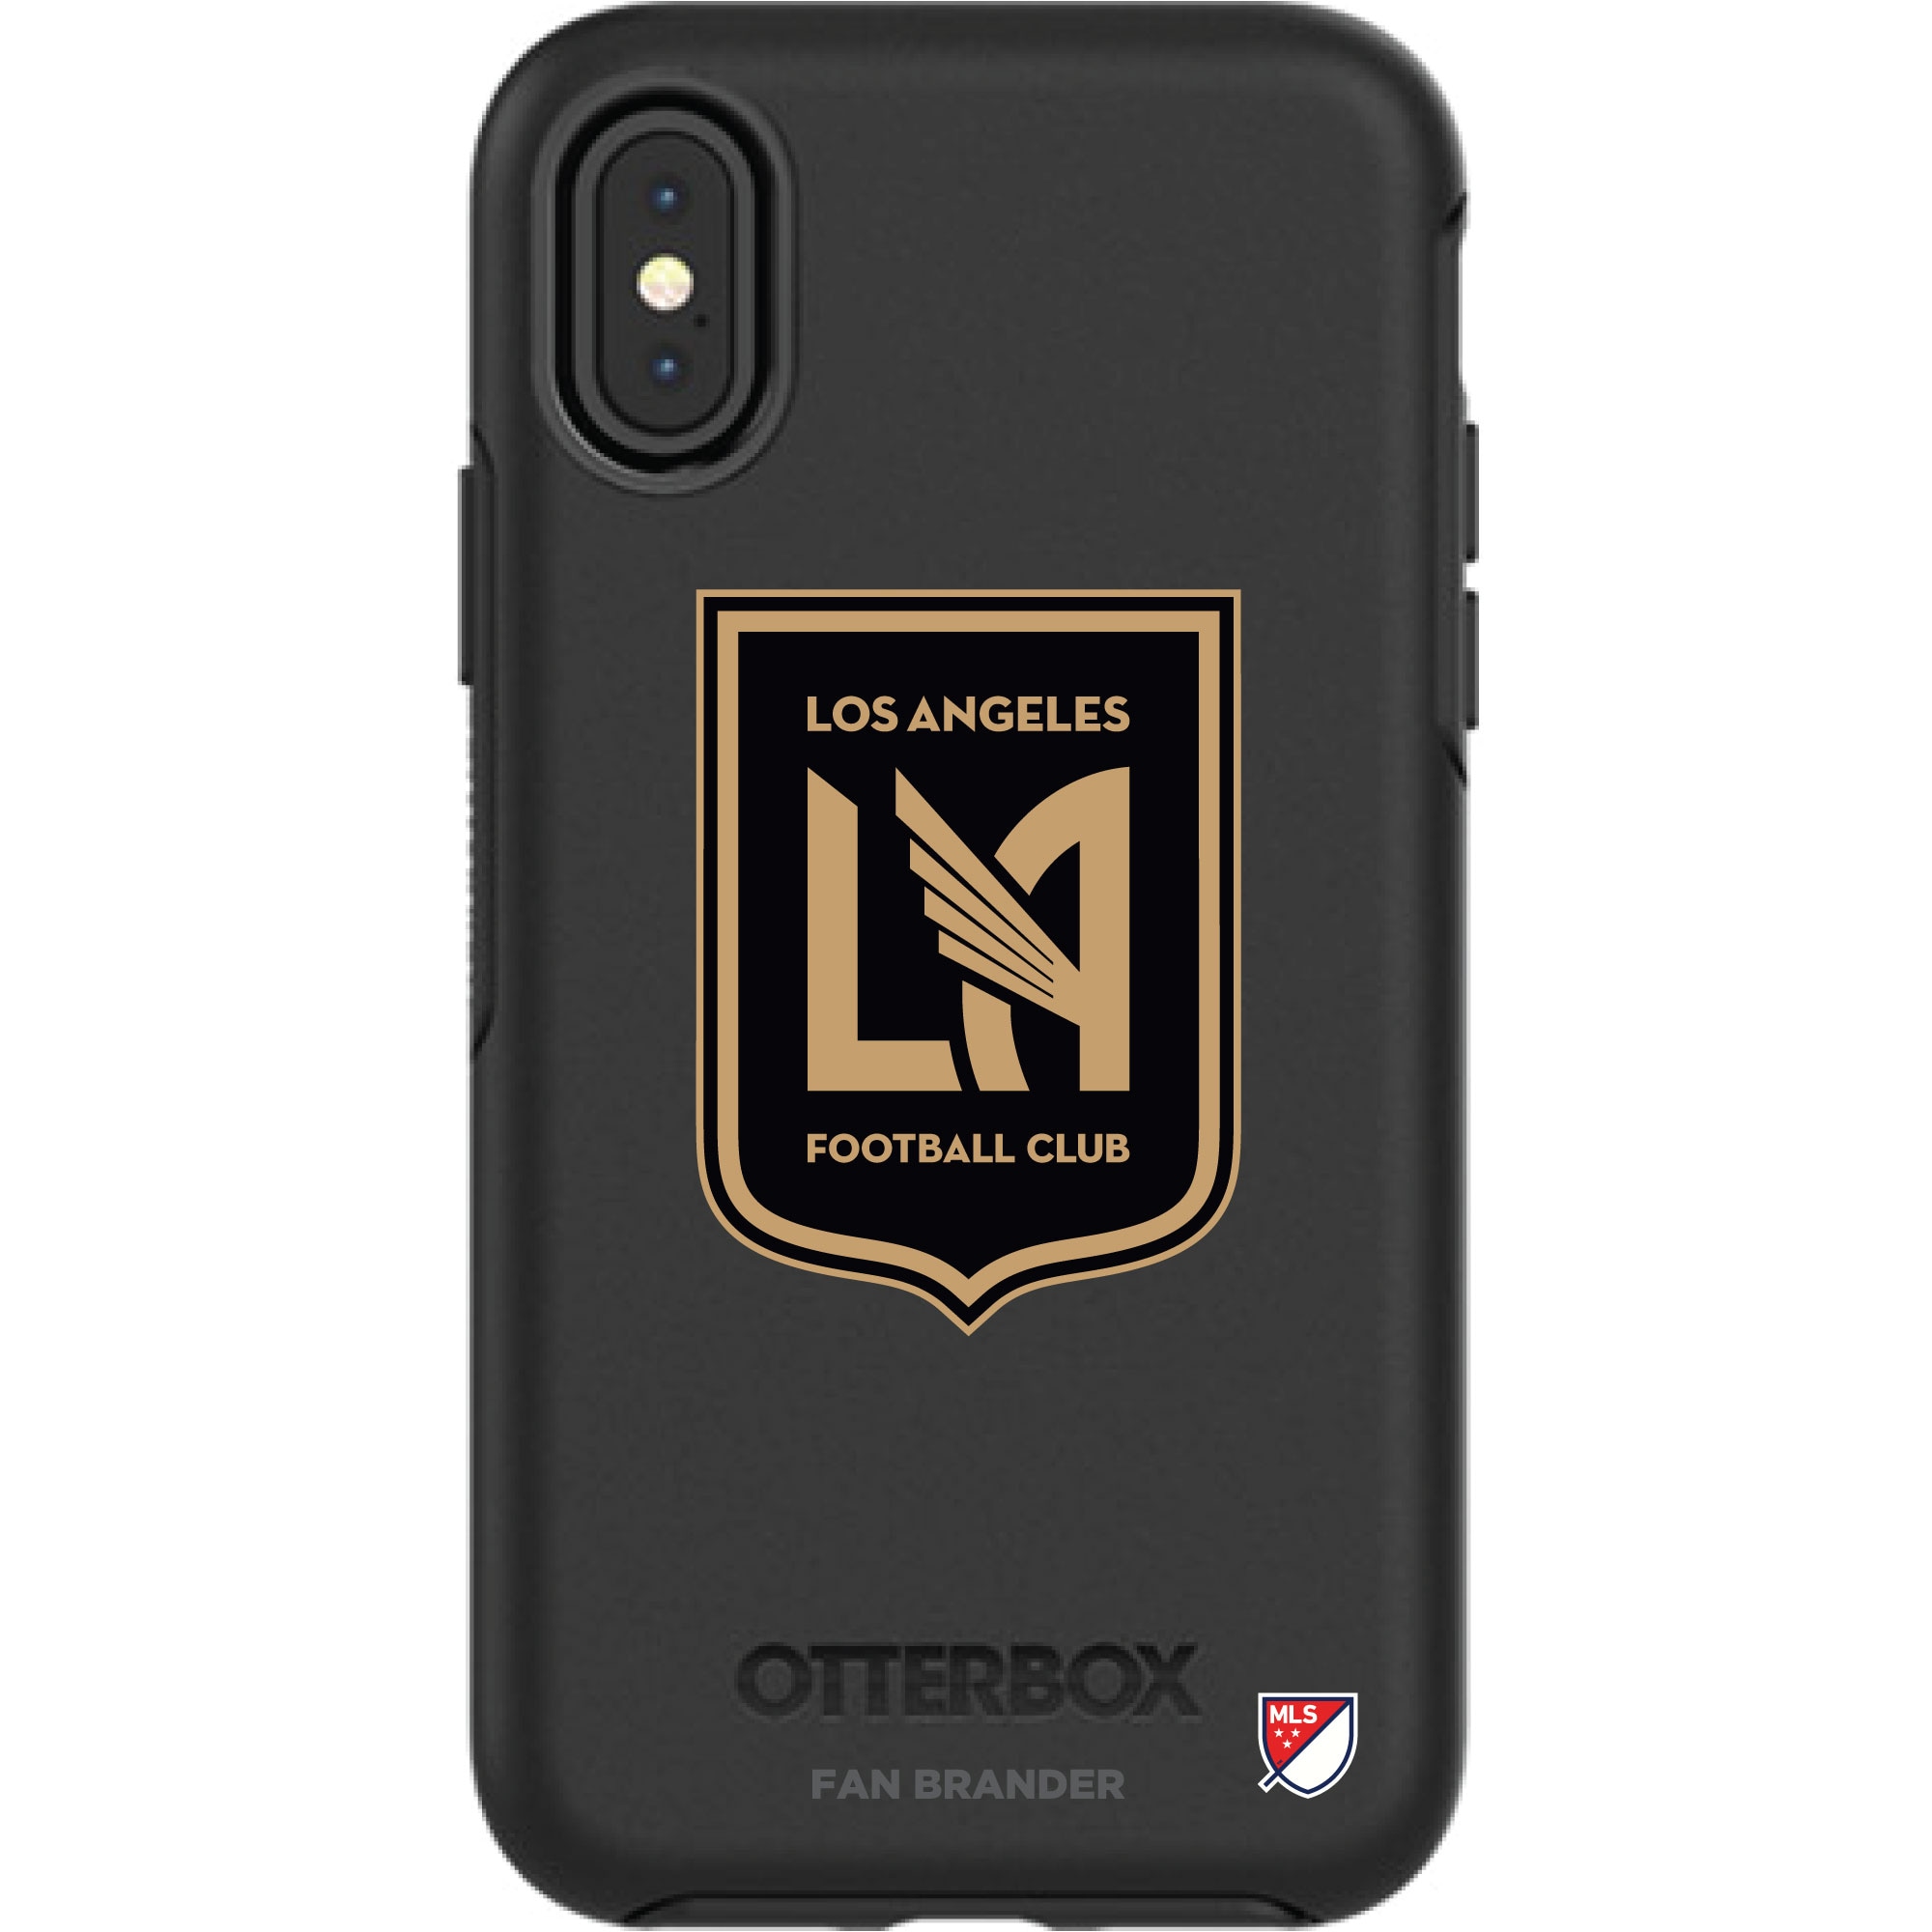 OtterBox LAFC iPhone Symmetry Series Case - image 1 of 4